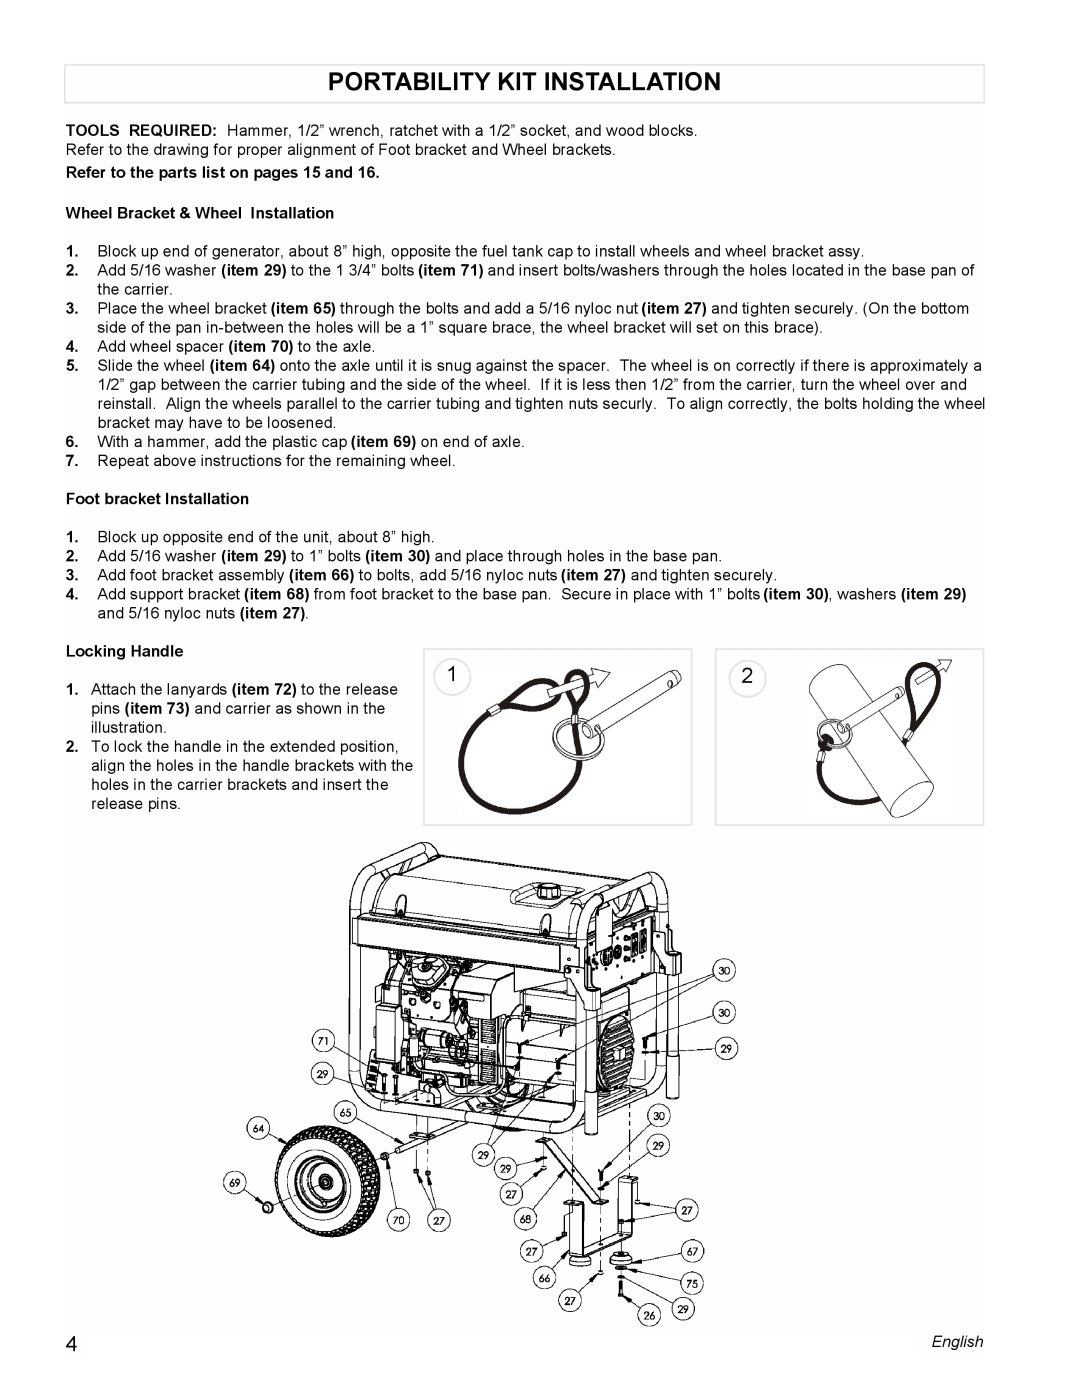 Coleman PM0601100 manual Portability Kit Installation, Refer to the parts list on pages 15 and, Foot bracket Installation 